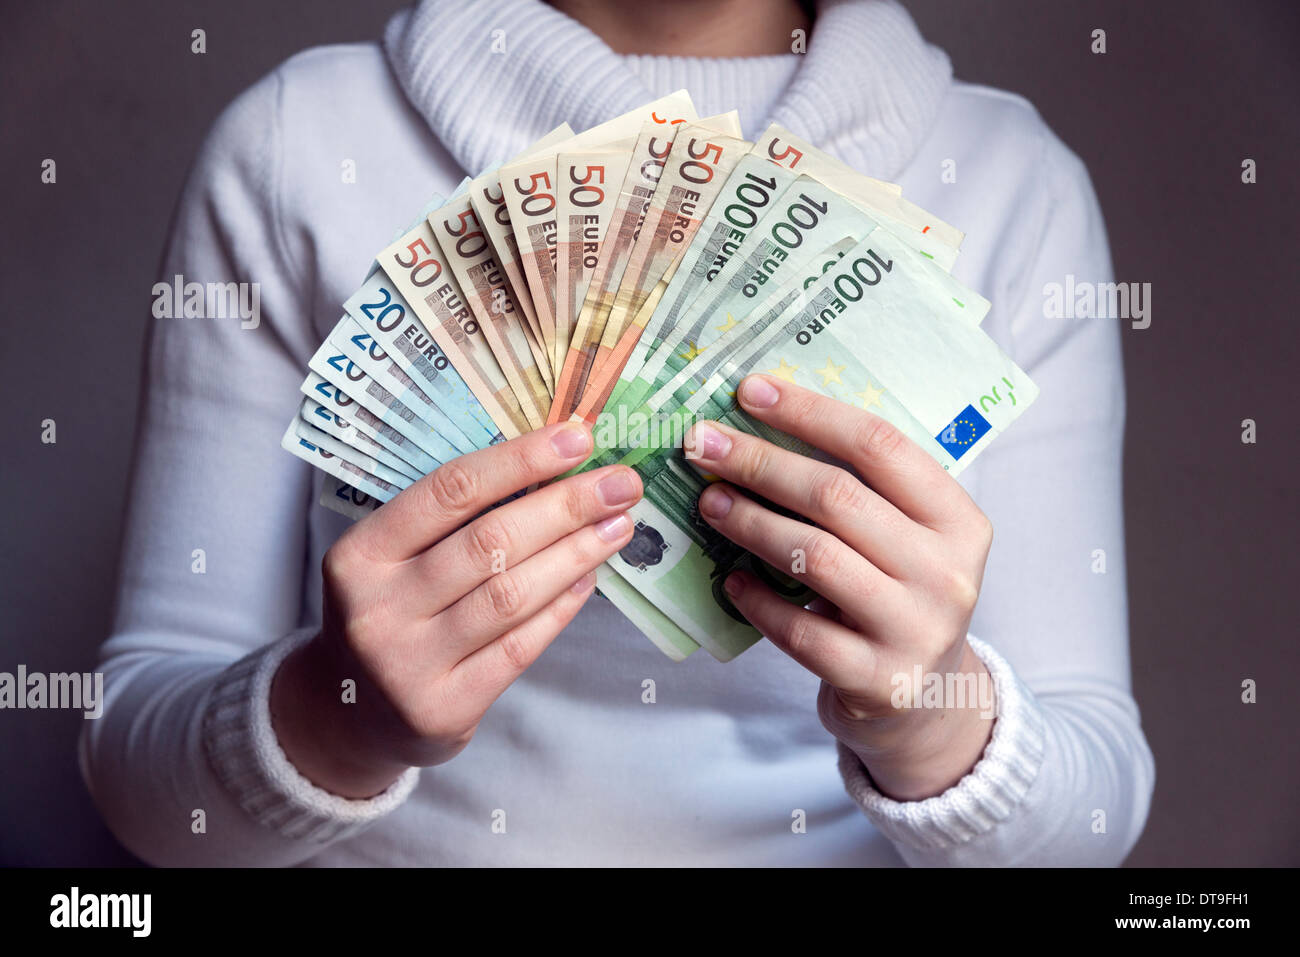 Woman holding wad of Euro banknotes Stock Photo